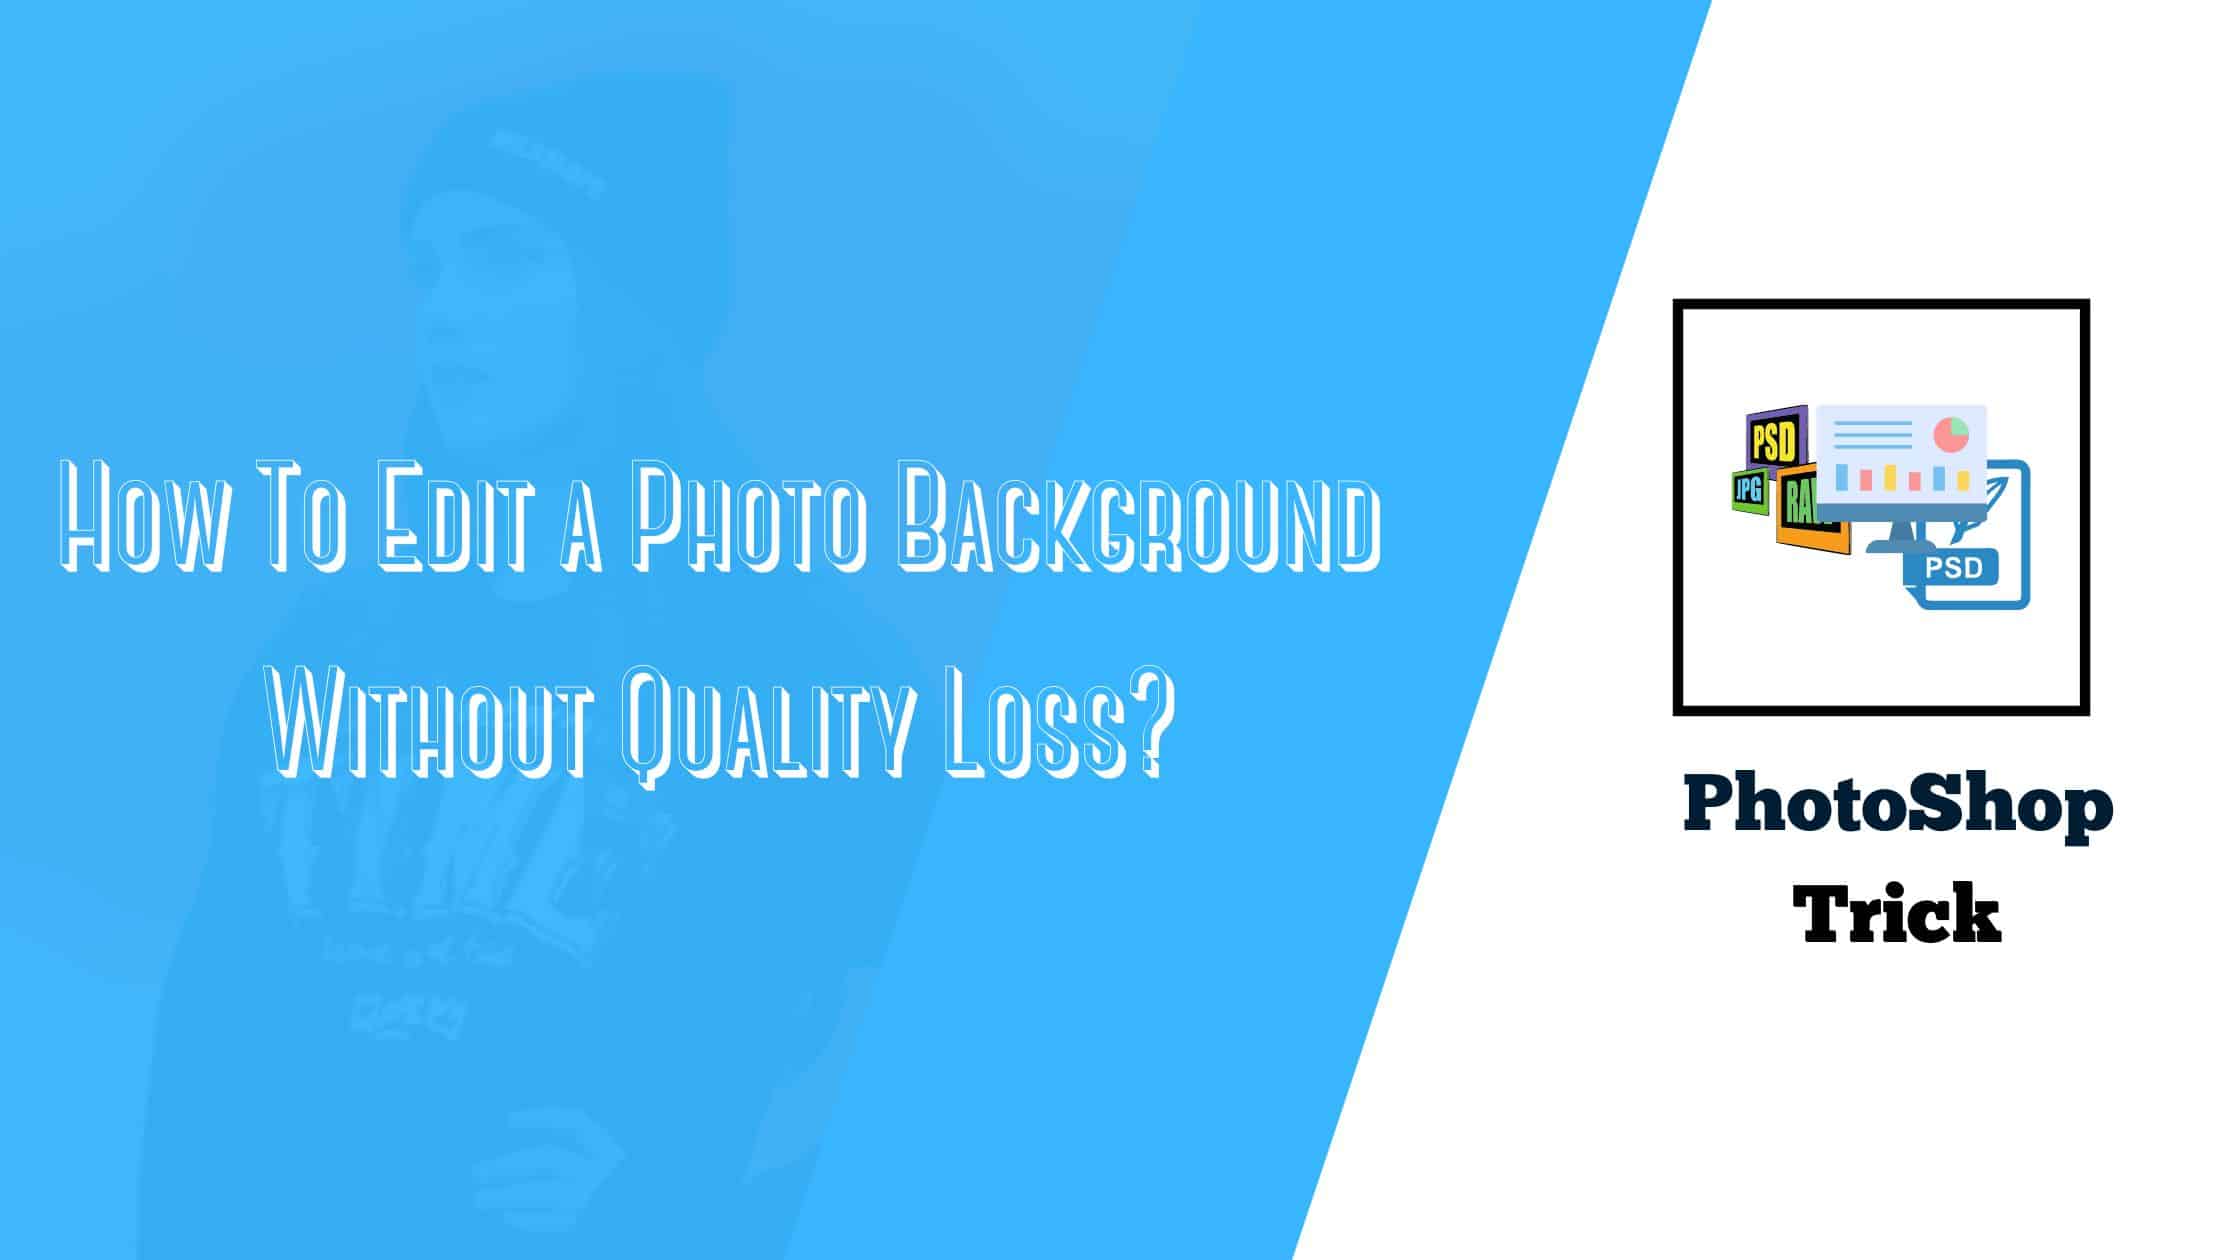 How To Edit a Photo Background Without Quality Loss